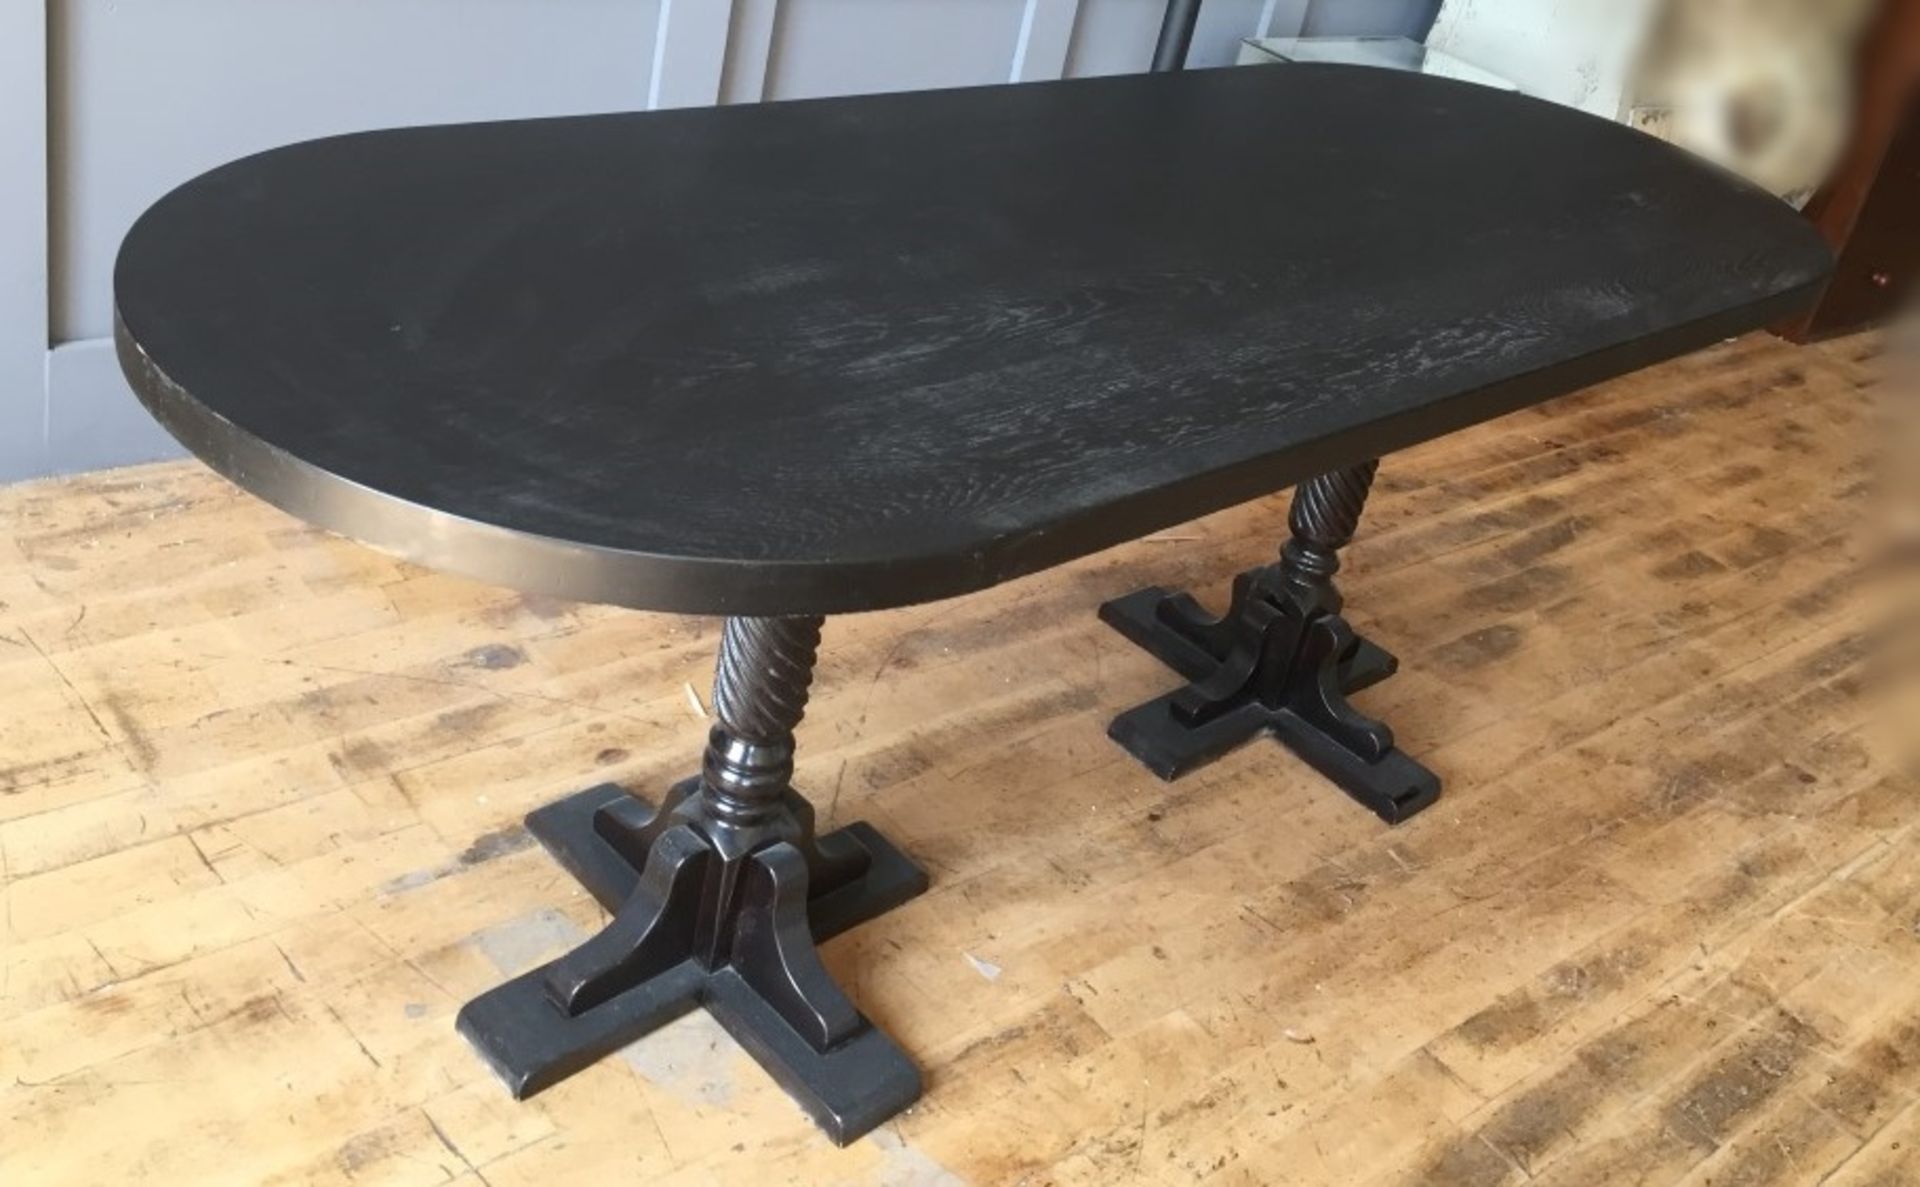 1 x Oval Period-Style Wooden Dining Table In A Dark Stain - Ex-Display - Dimensions: 200cm x width - Image 2 of 5